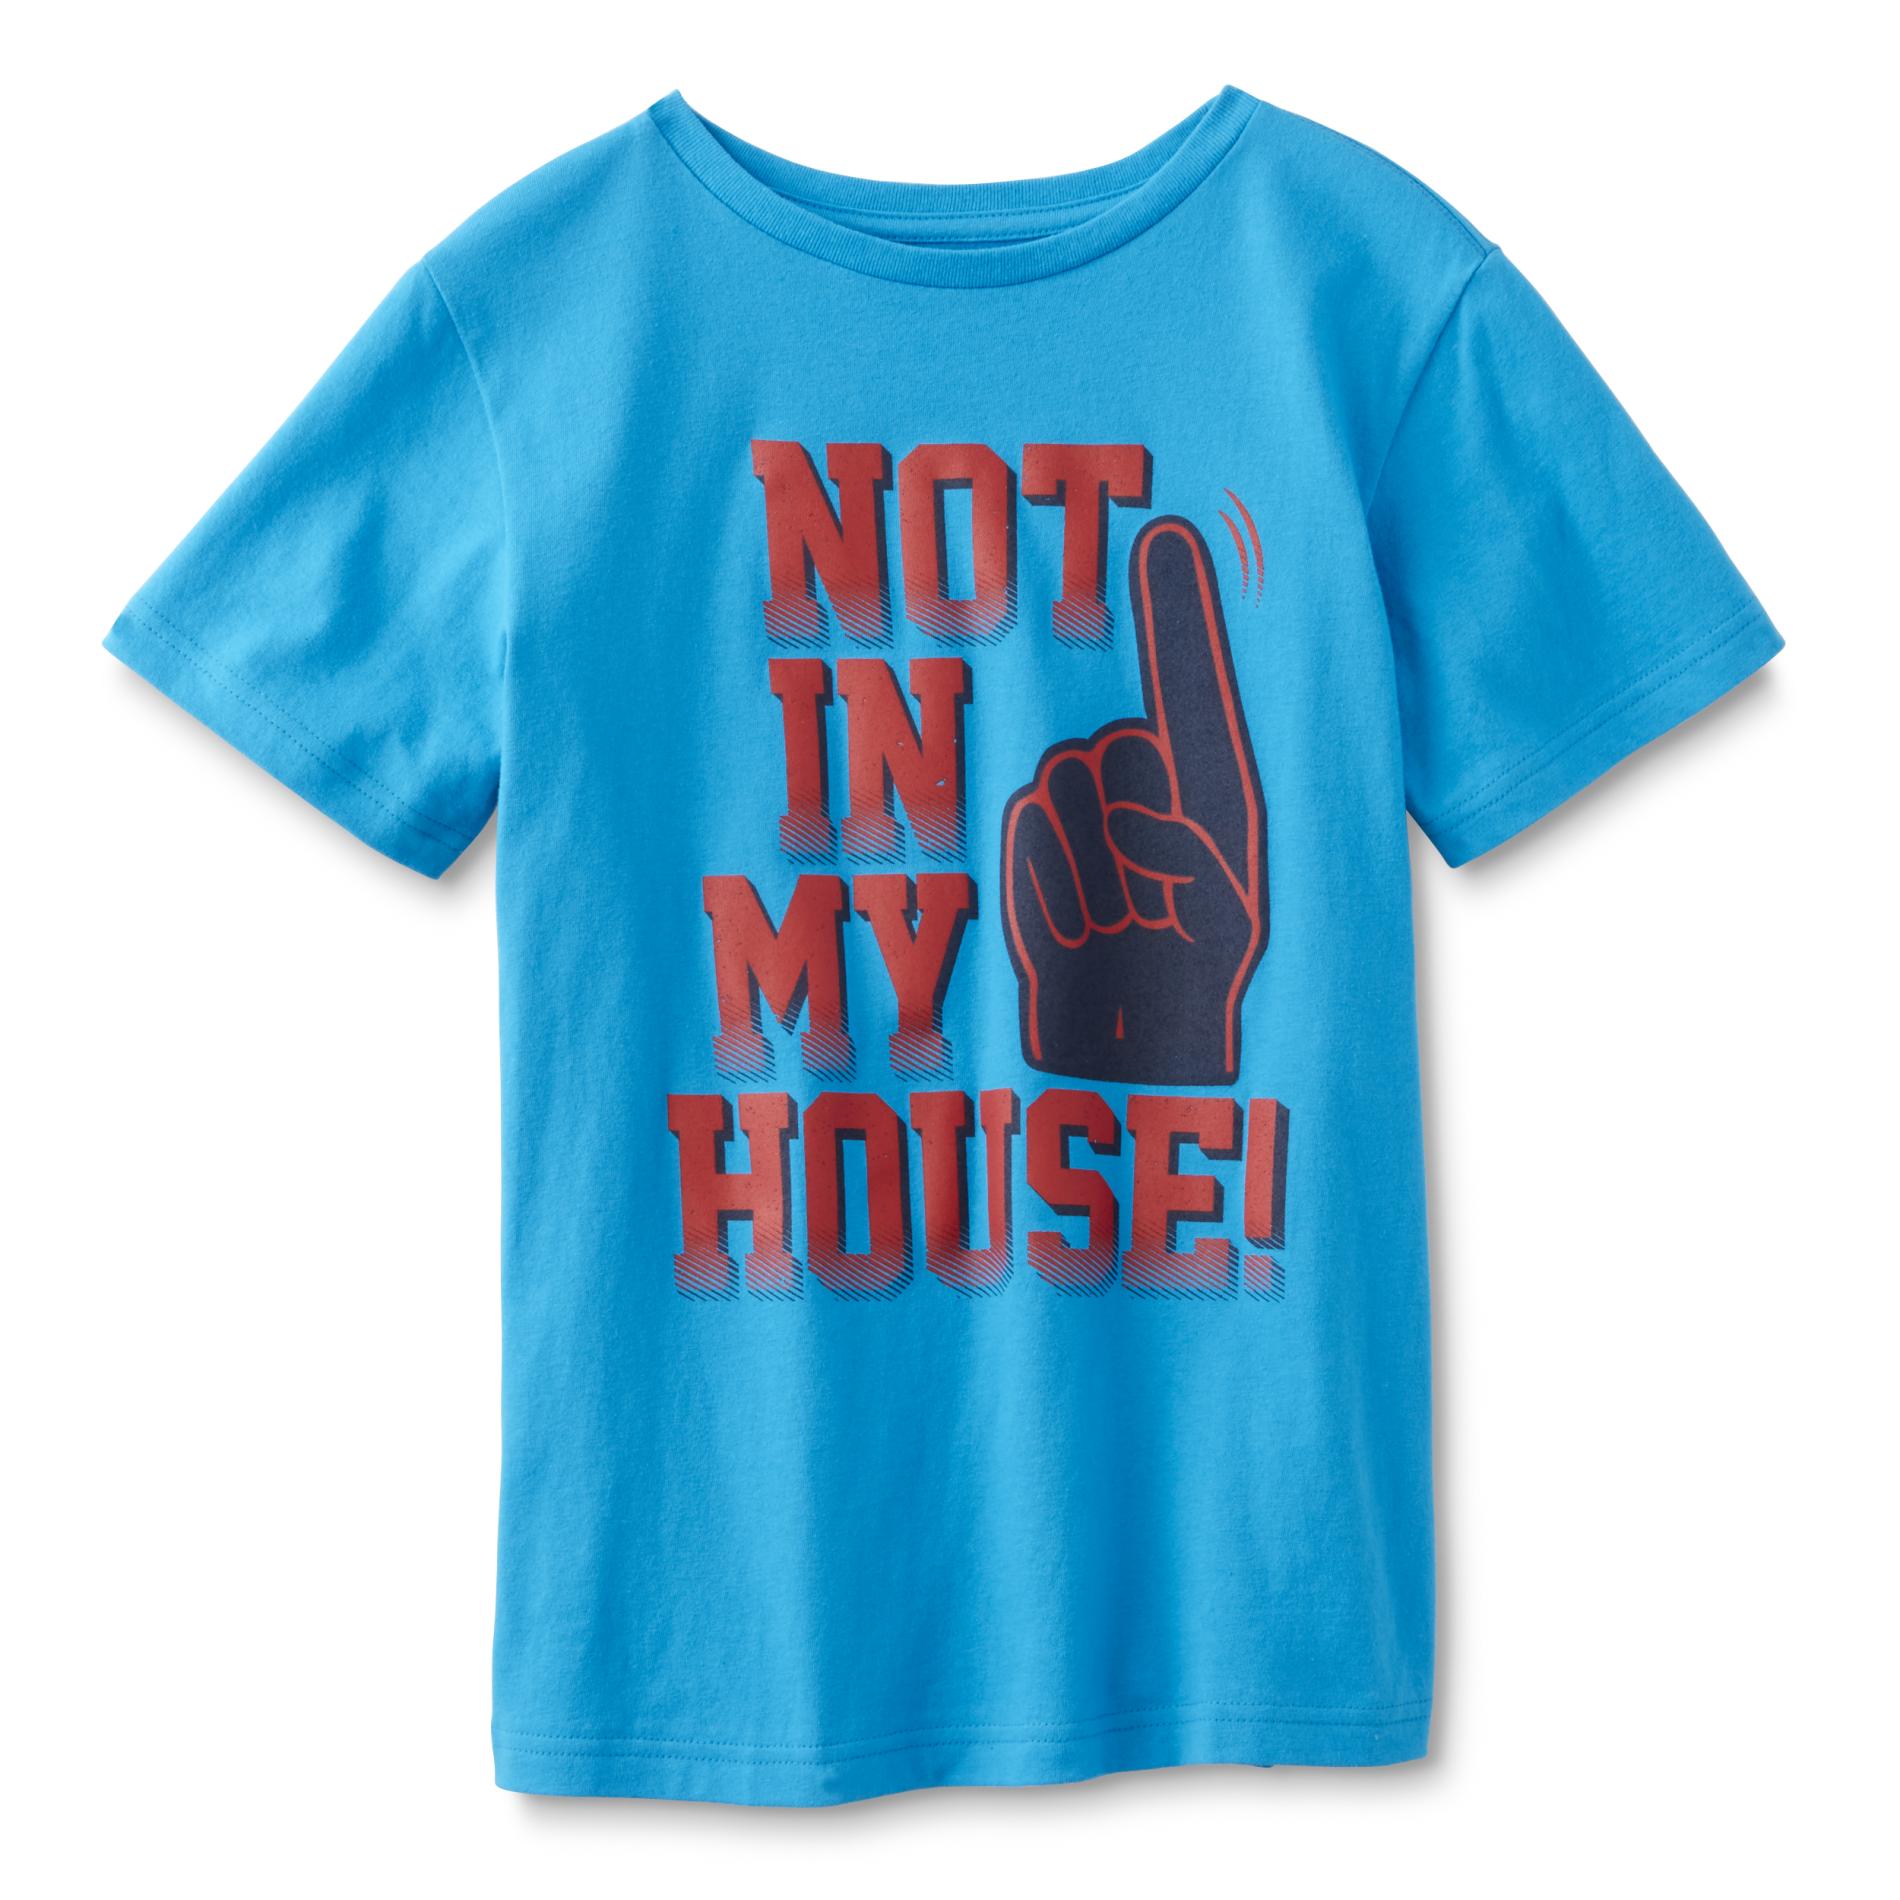 Athletech Boy's Graphic T-Shirt - Not In My House